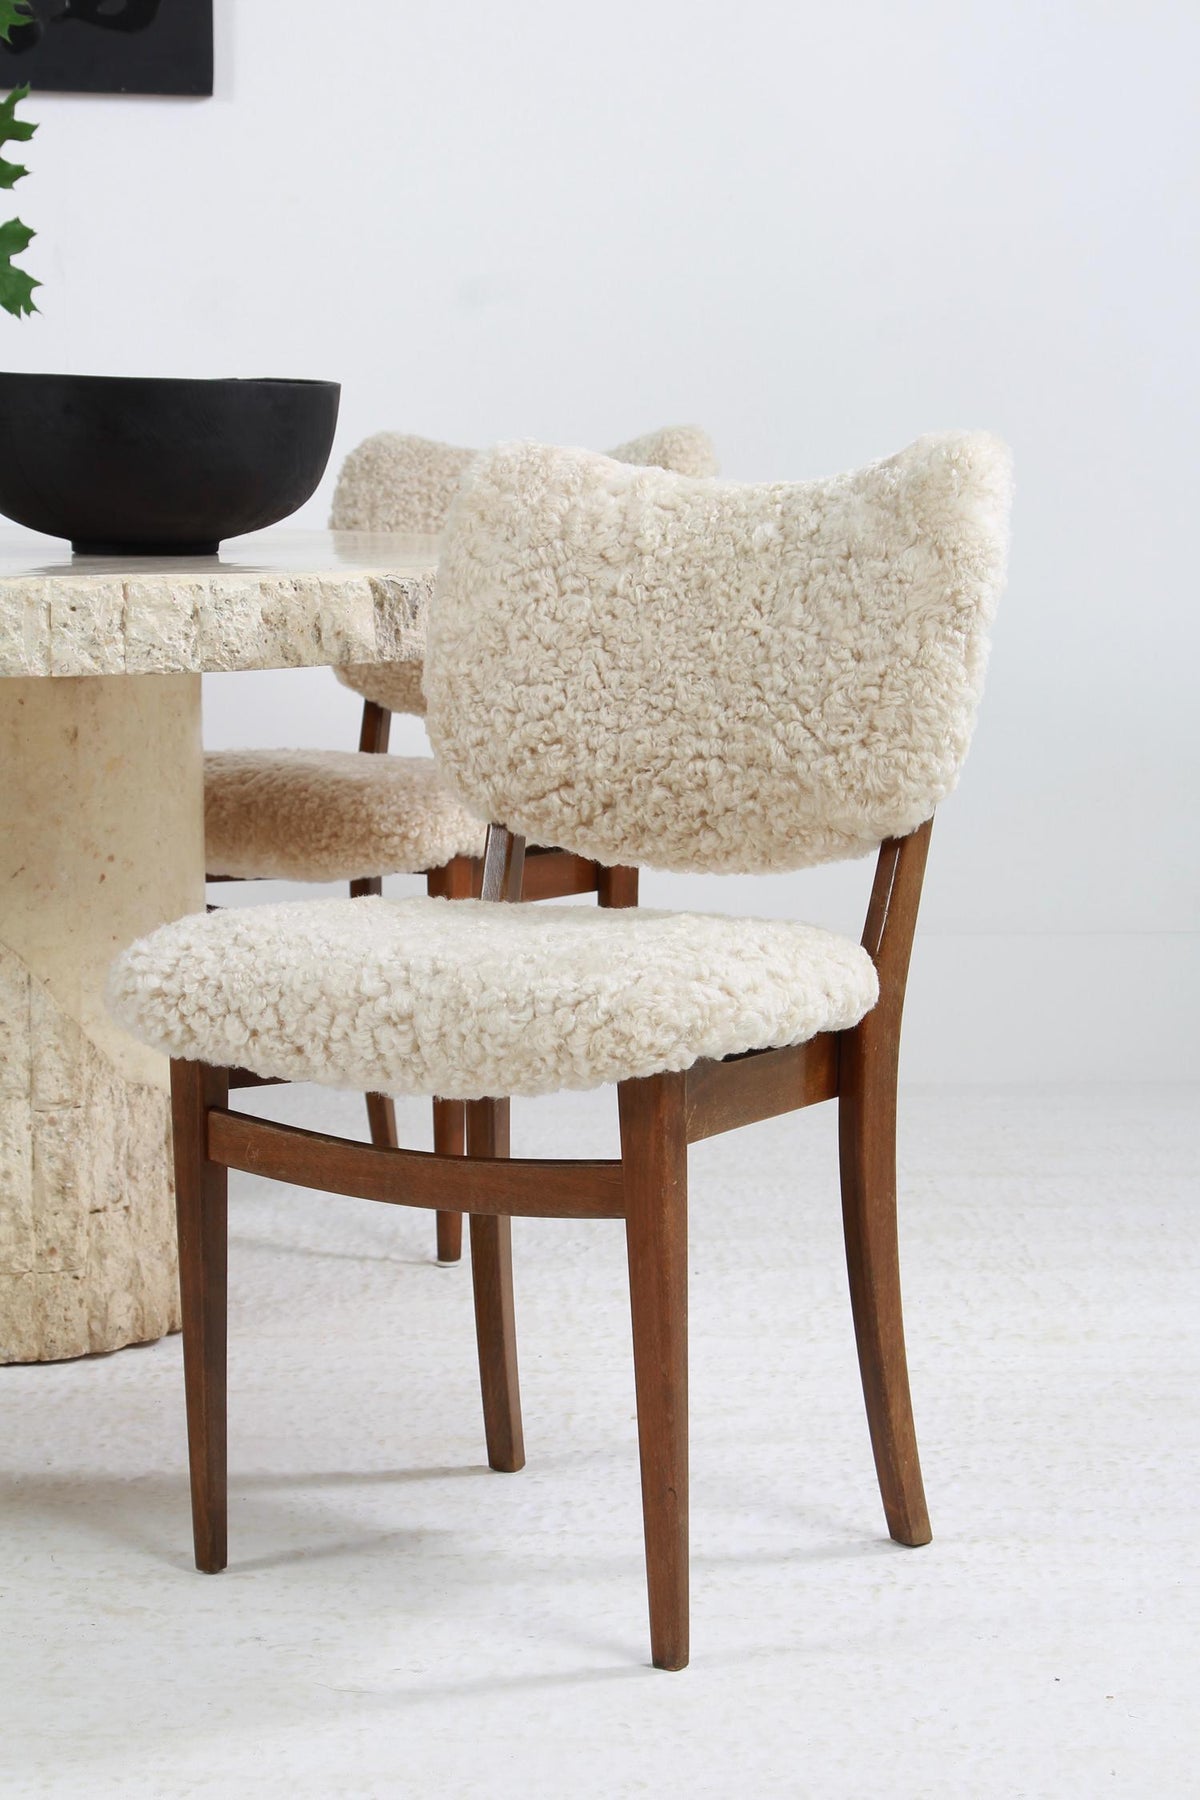 SET OF FOUR  DANISH MID CENTURY MODERN DINING CHAIRS UPHOLSTERED NATURAL SHEEPSKIN